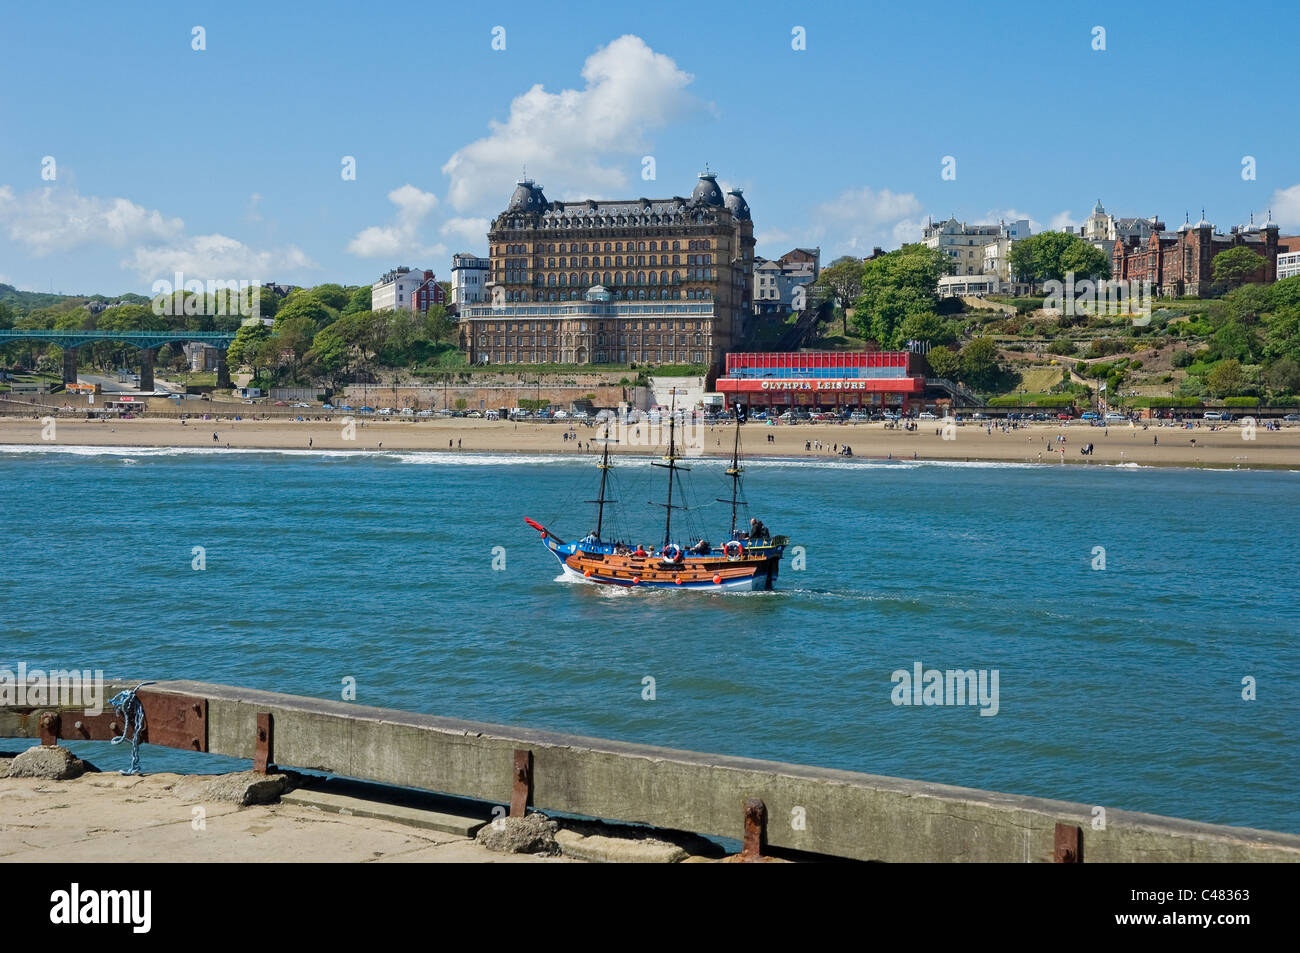 Pleasure boat with Grand Hotel in background South Bay Scarborough North Yorkshire England UK United Kingdom GB Great Britain Stock Photo